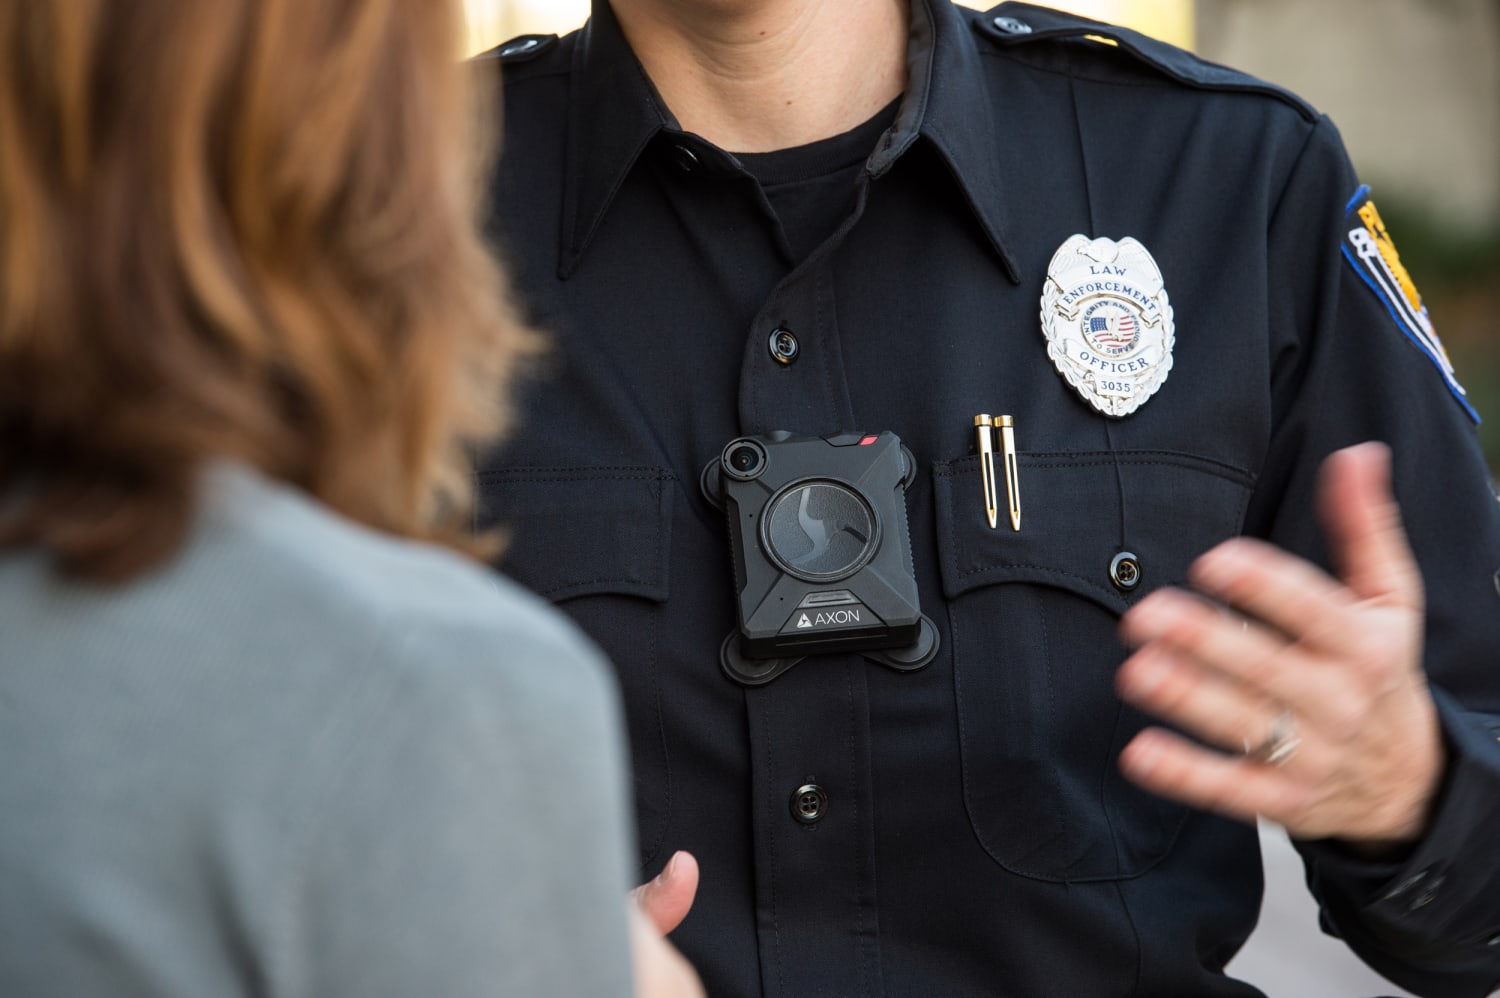 Police body cam maker Axon unveils new features it hopes will curb